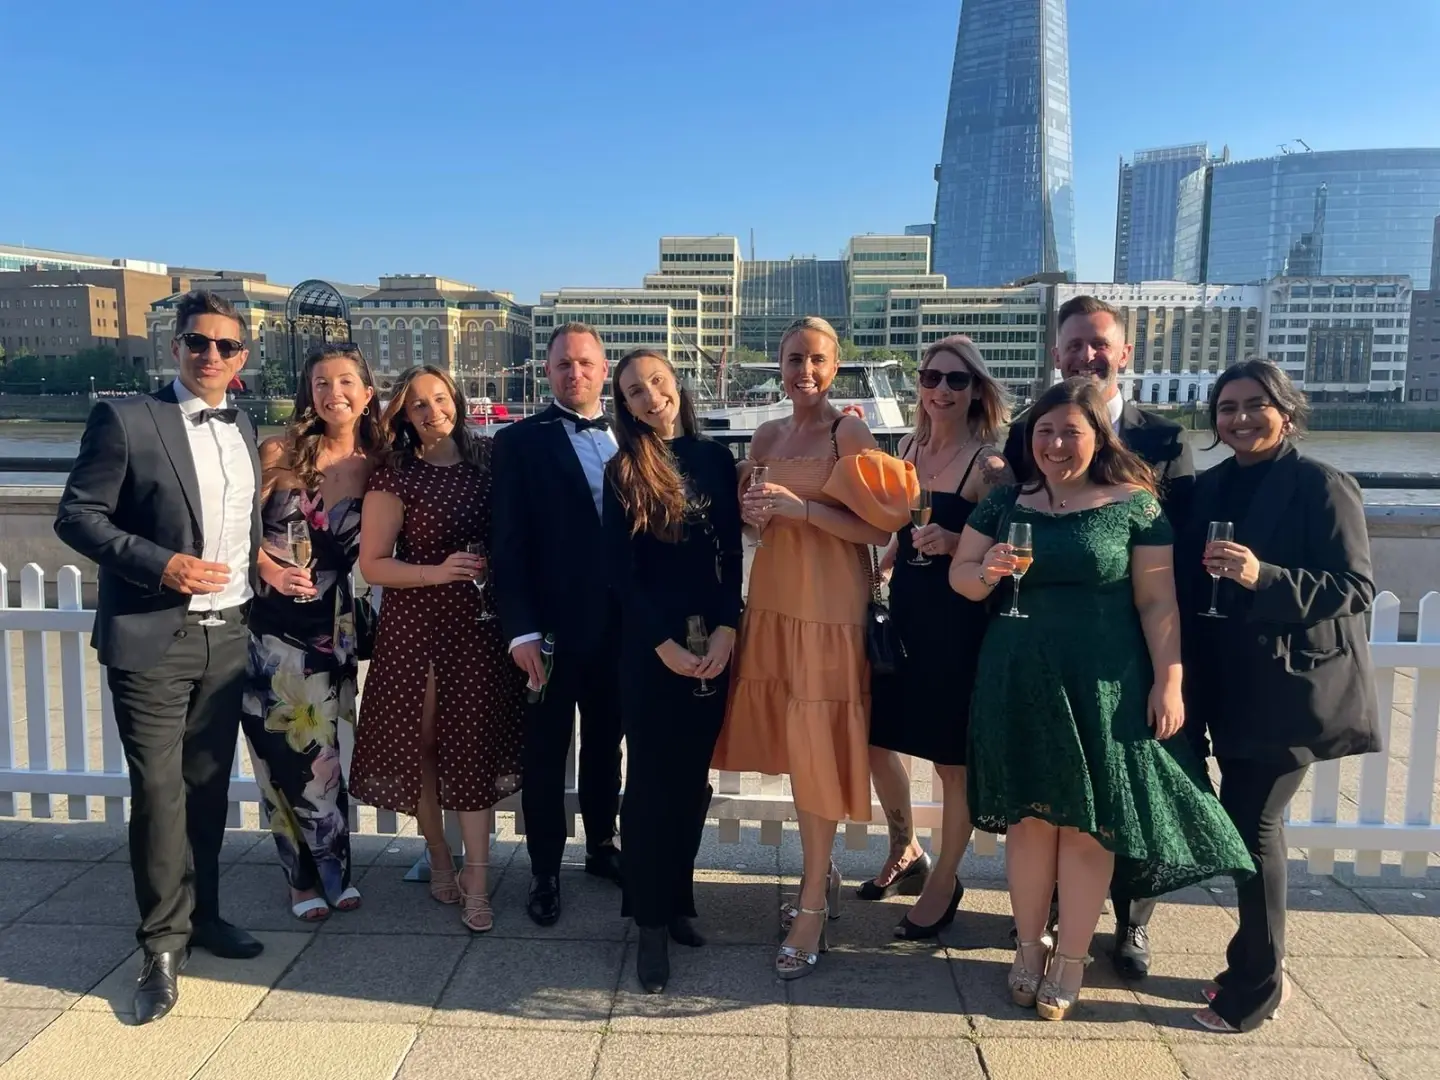 tms team at International Loyalty Awards in London